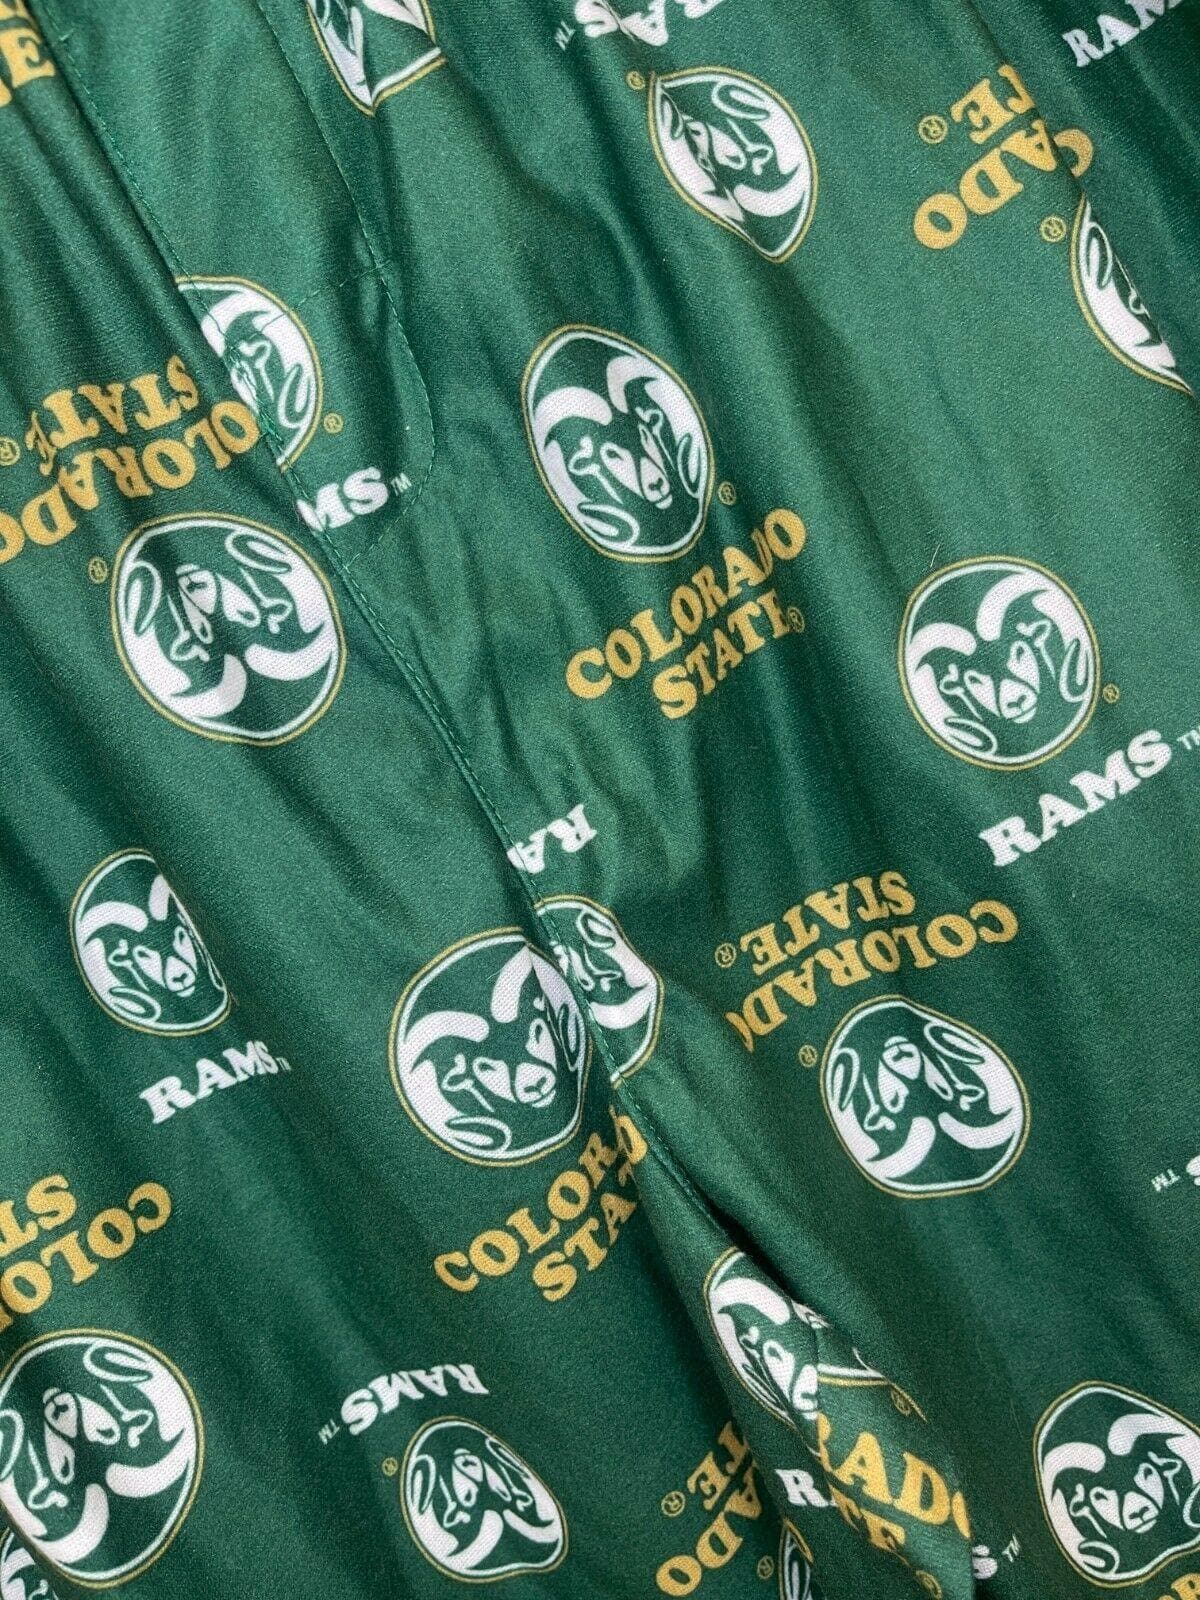 NCAA Colorado State Rams Brushed Knit Pyjama Bottoms Youth XL 18-20 NWT